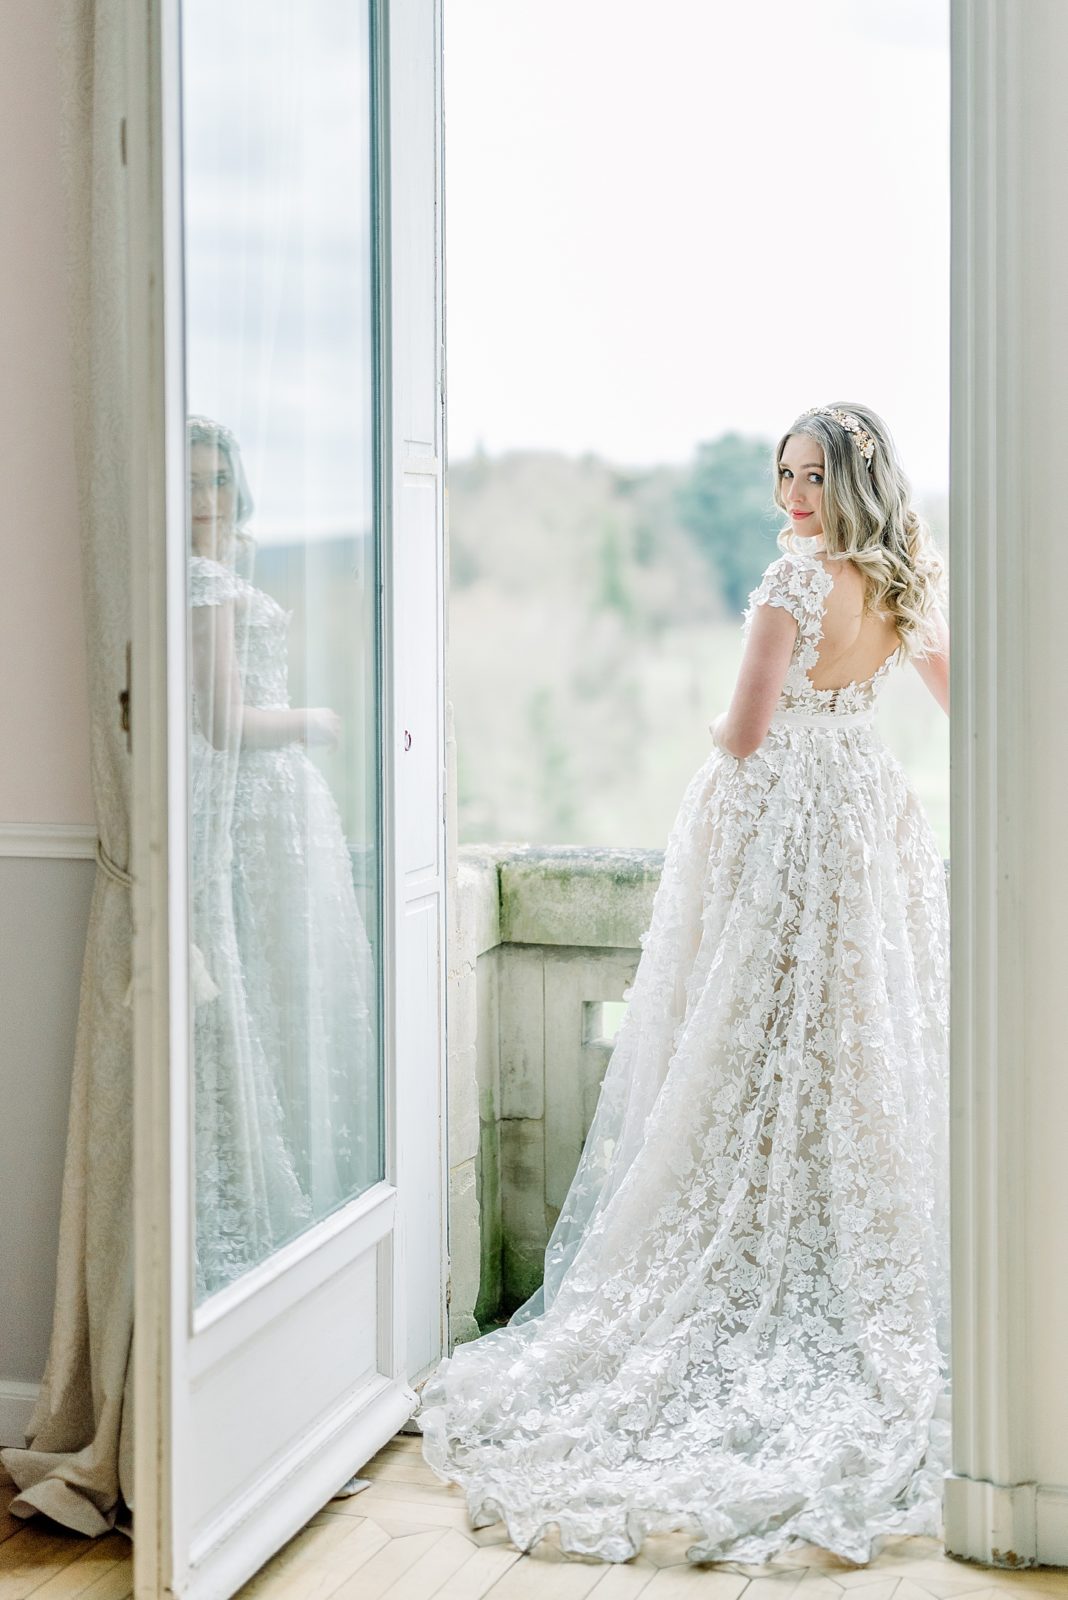 Bride standing on balcony on wedding day at Chateau Bouffemont